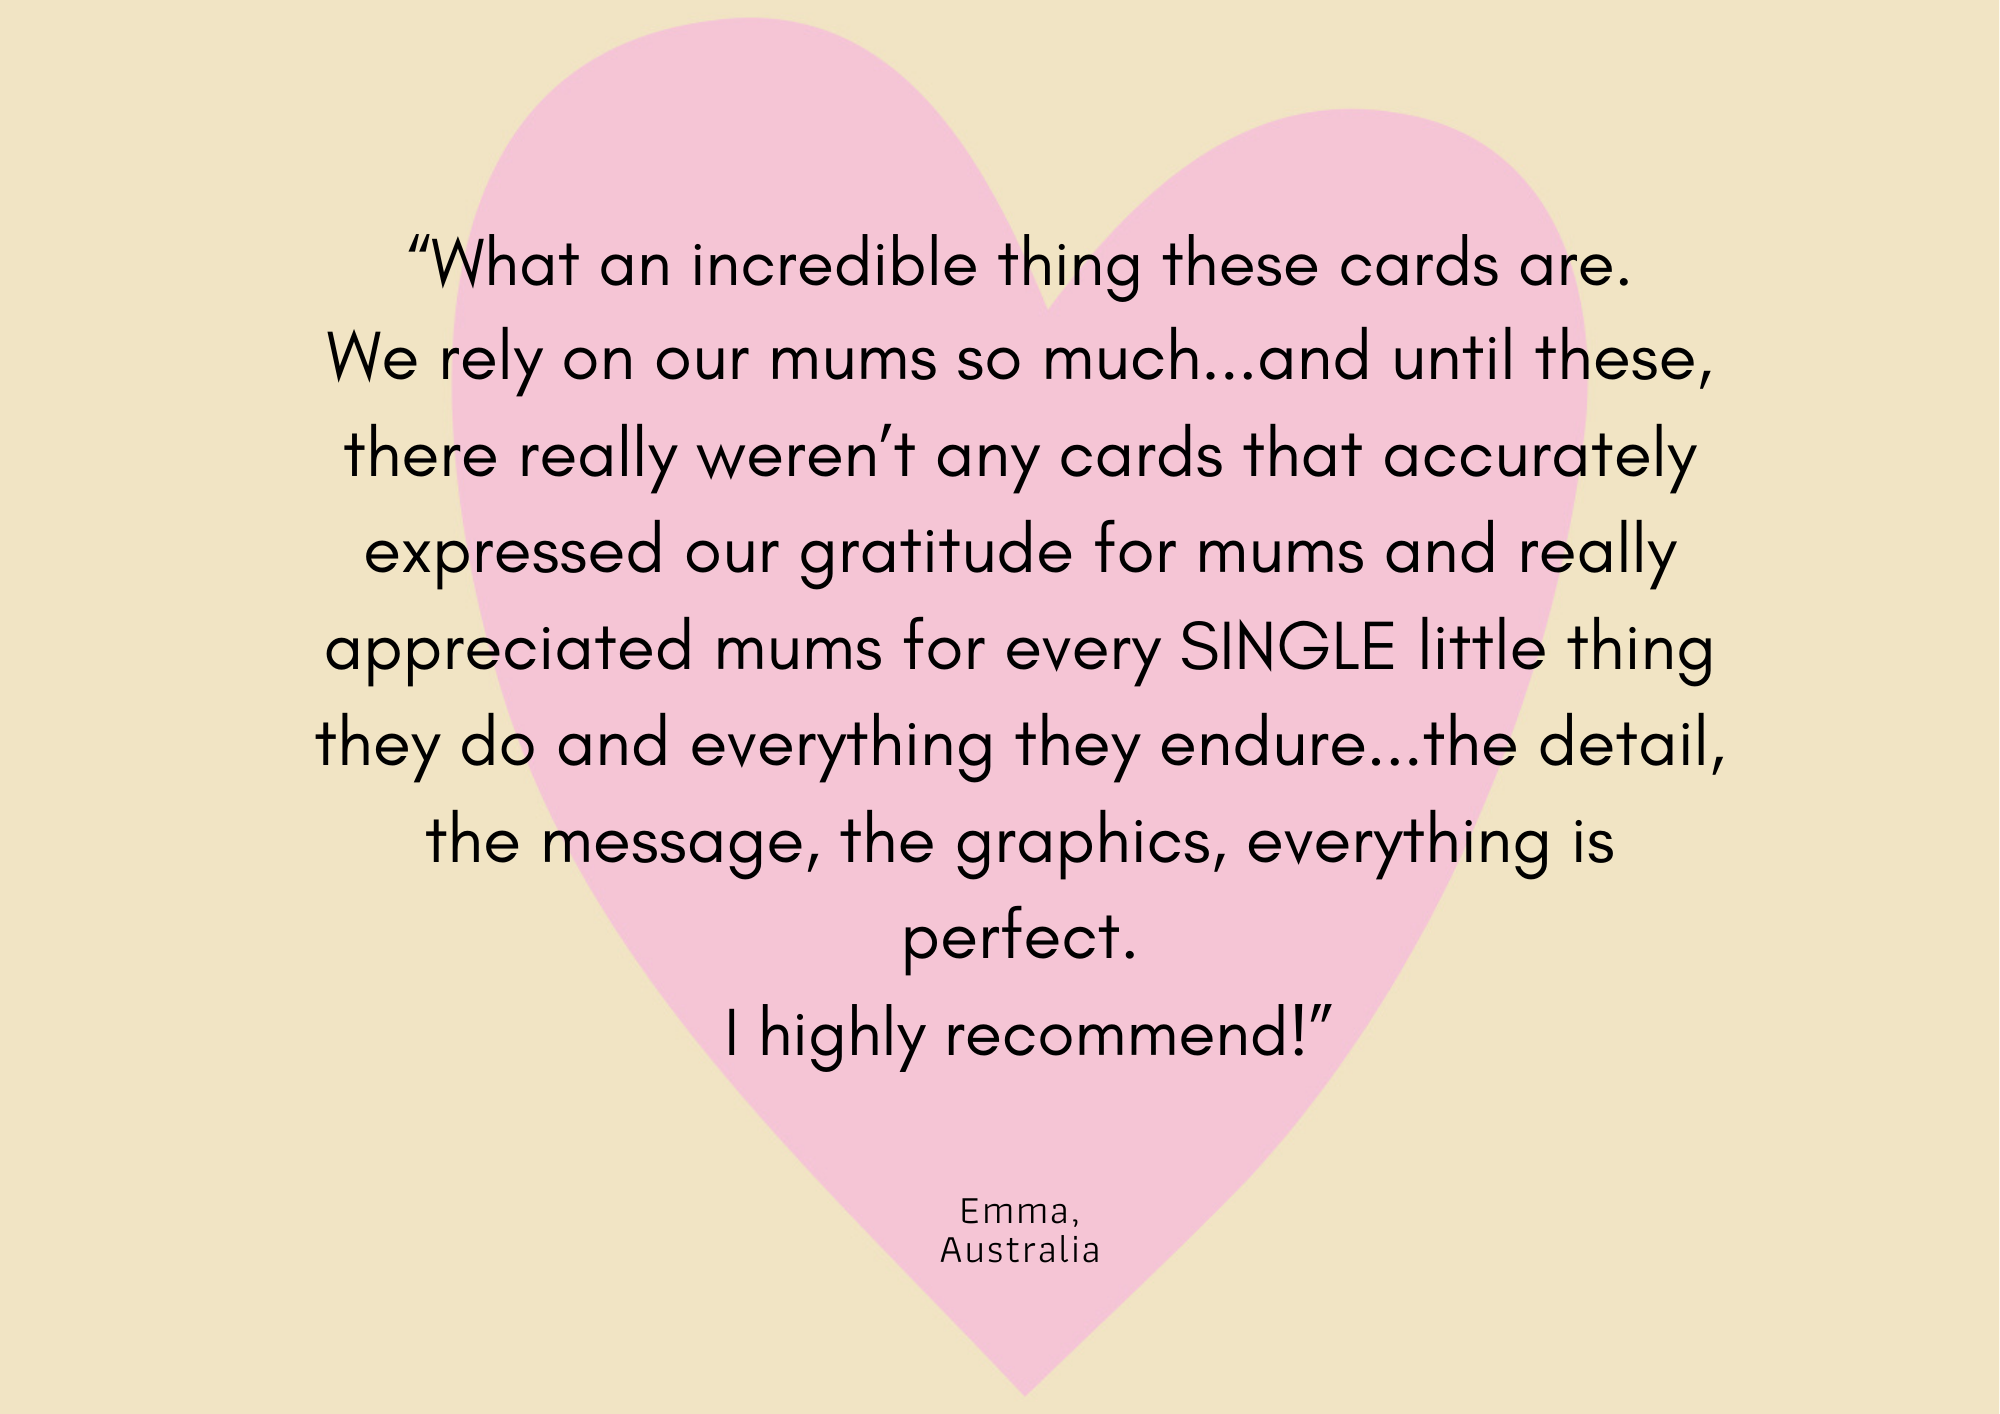 The background is yellow with a pink heart in the middle. Overlayed on this is text that reads what an incredible thing these cards are. We rely on our mums so much and until these there weren't really any cards that accurately expressed our gratitude for mums and really appreciated every single little things mums do and everything they endure. the detail, the message, the graphics, everything is perfect. I highly recommend. Emma, Australia. 